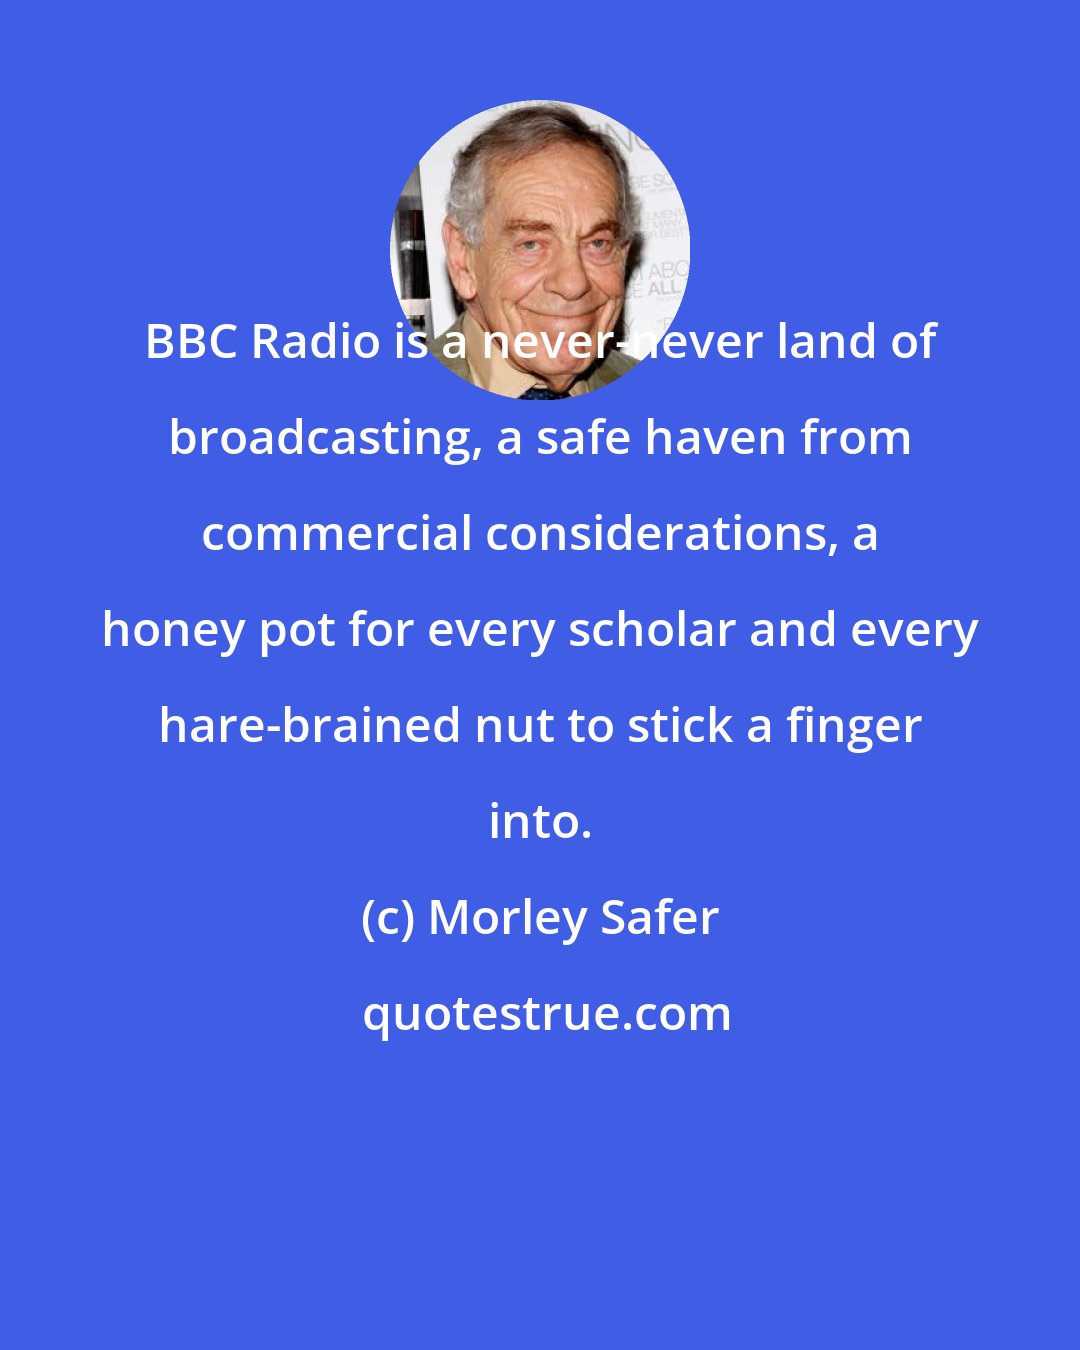 Morley Safer: BBC Radio is a never-never land of broadcasting, a safe haven from commercial considerations, a honey pot for every scholar and every hare-brained nut to stick a finger into.